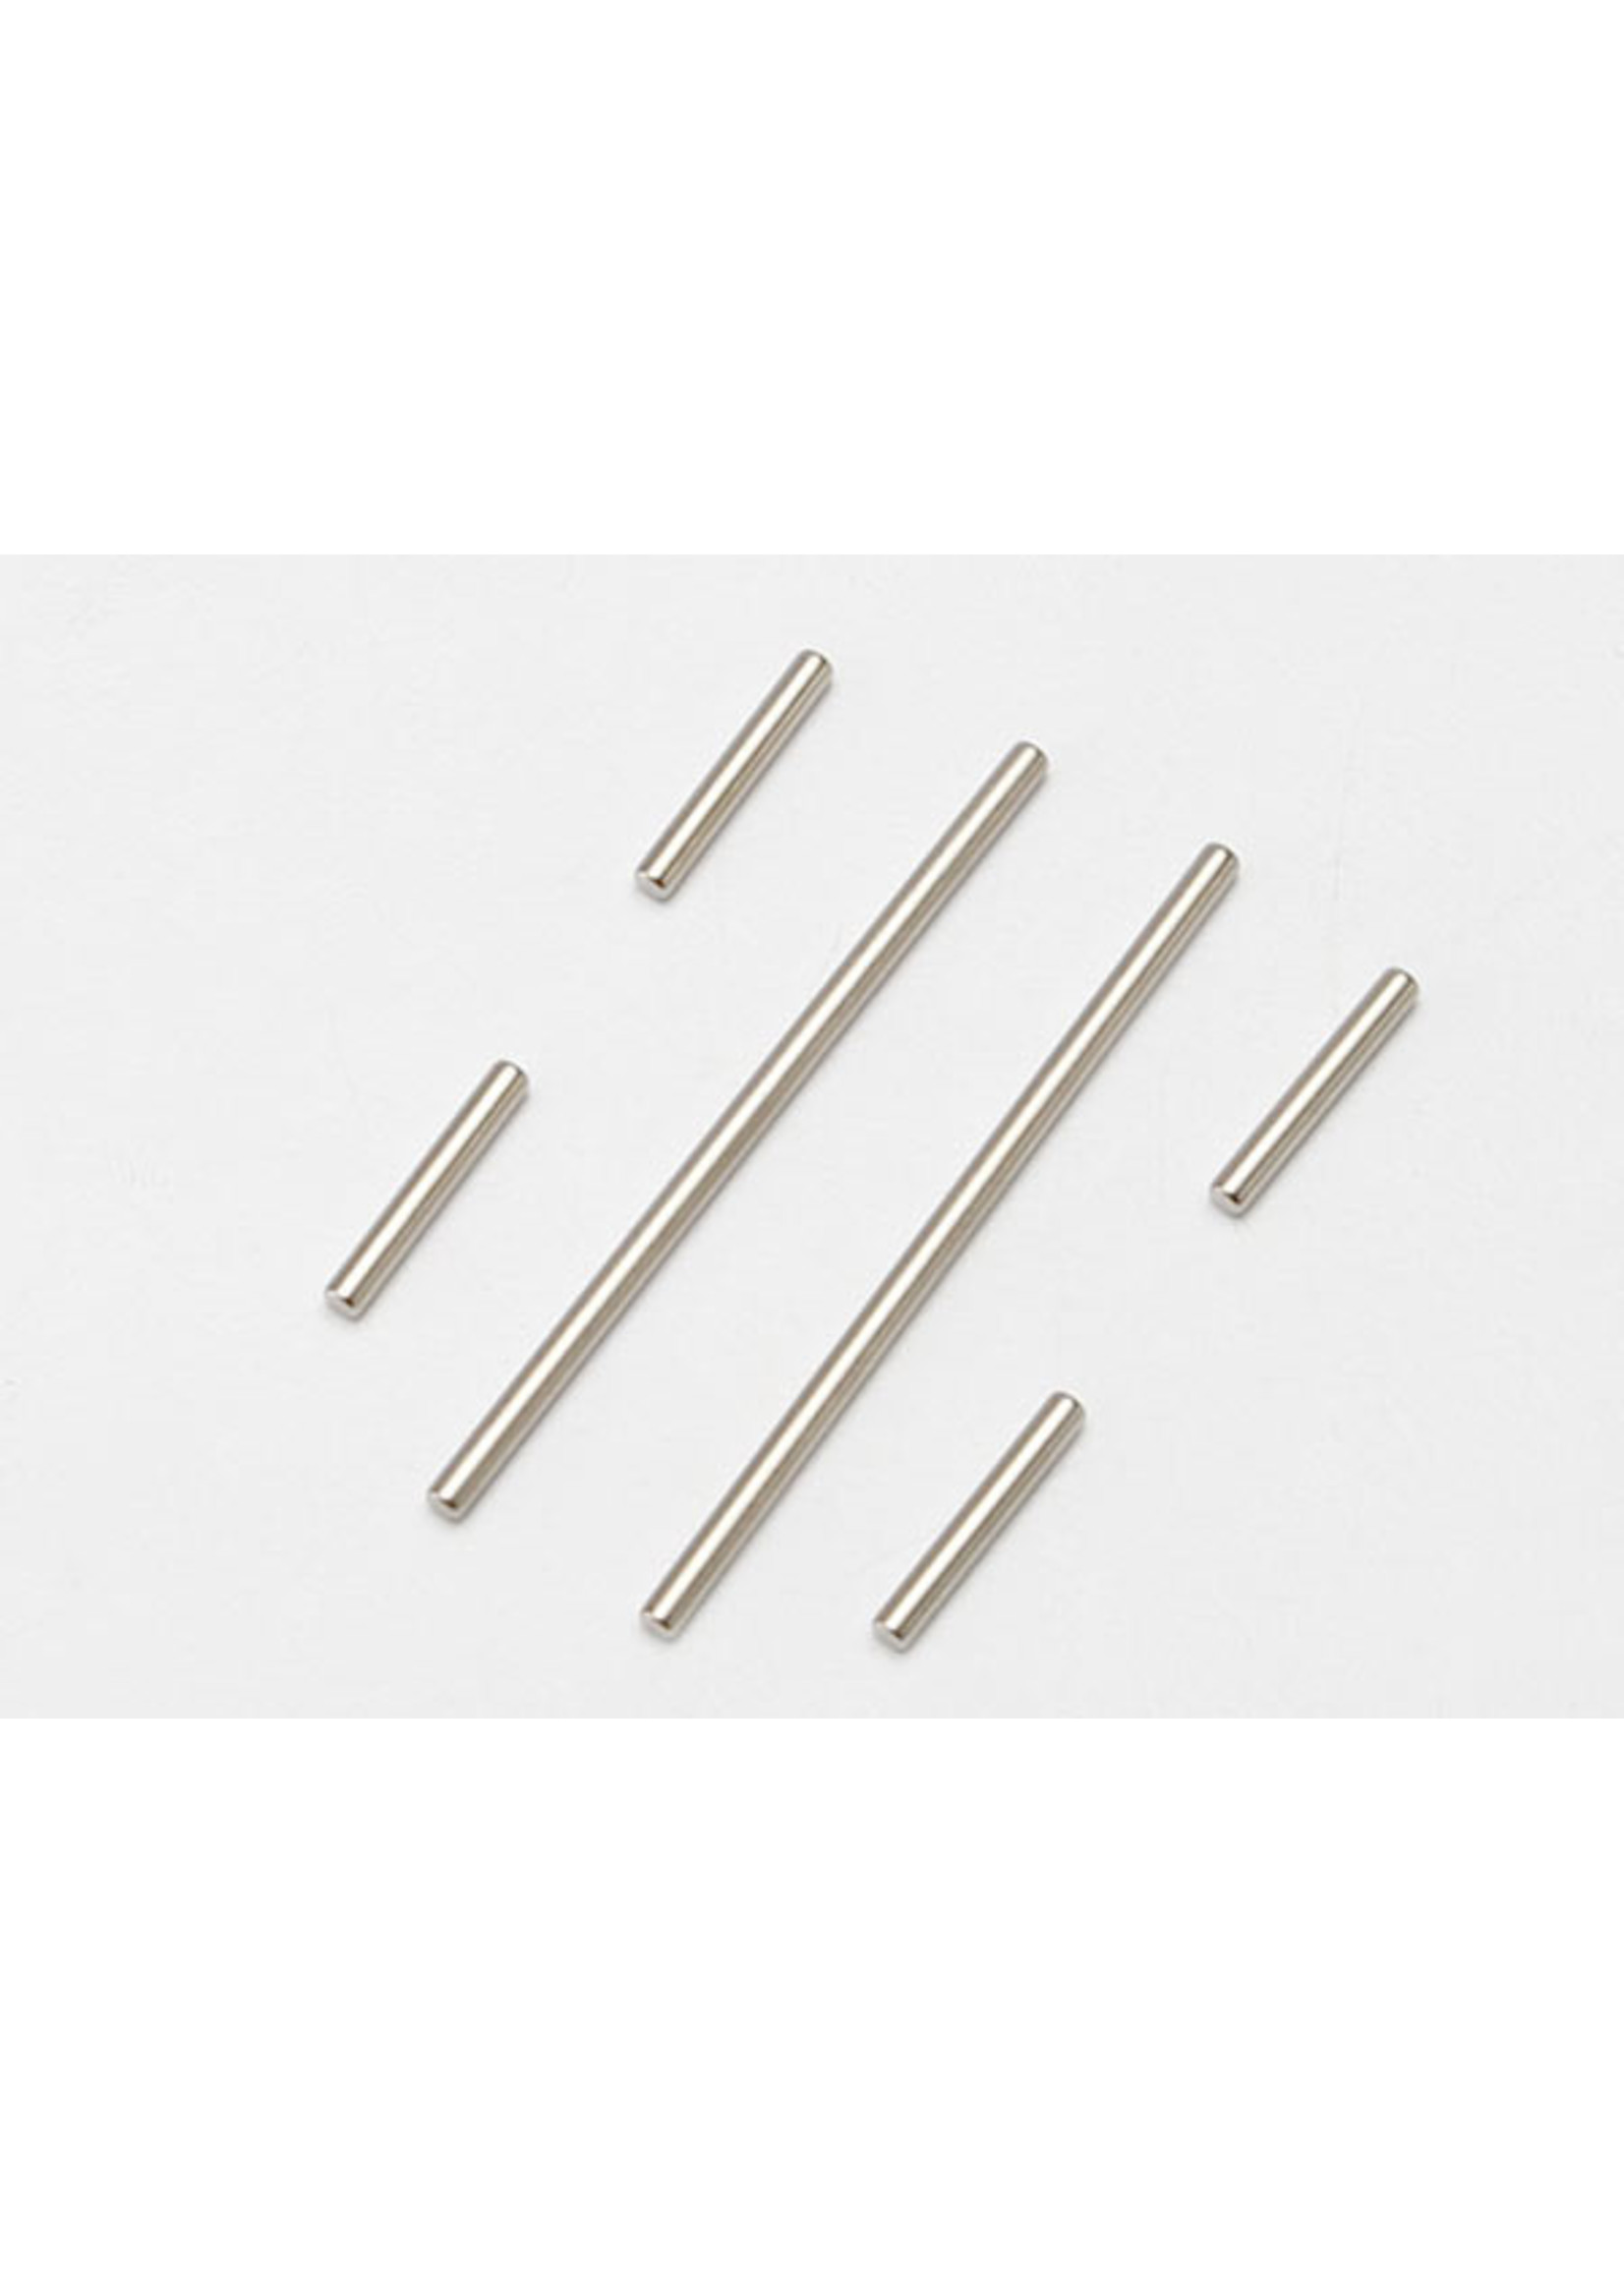 Traxxas 7021 - Suspension Pin Set, Front or Rear